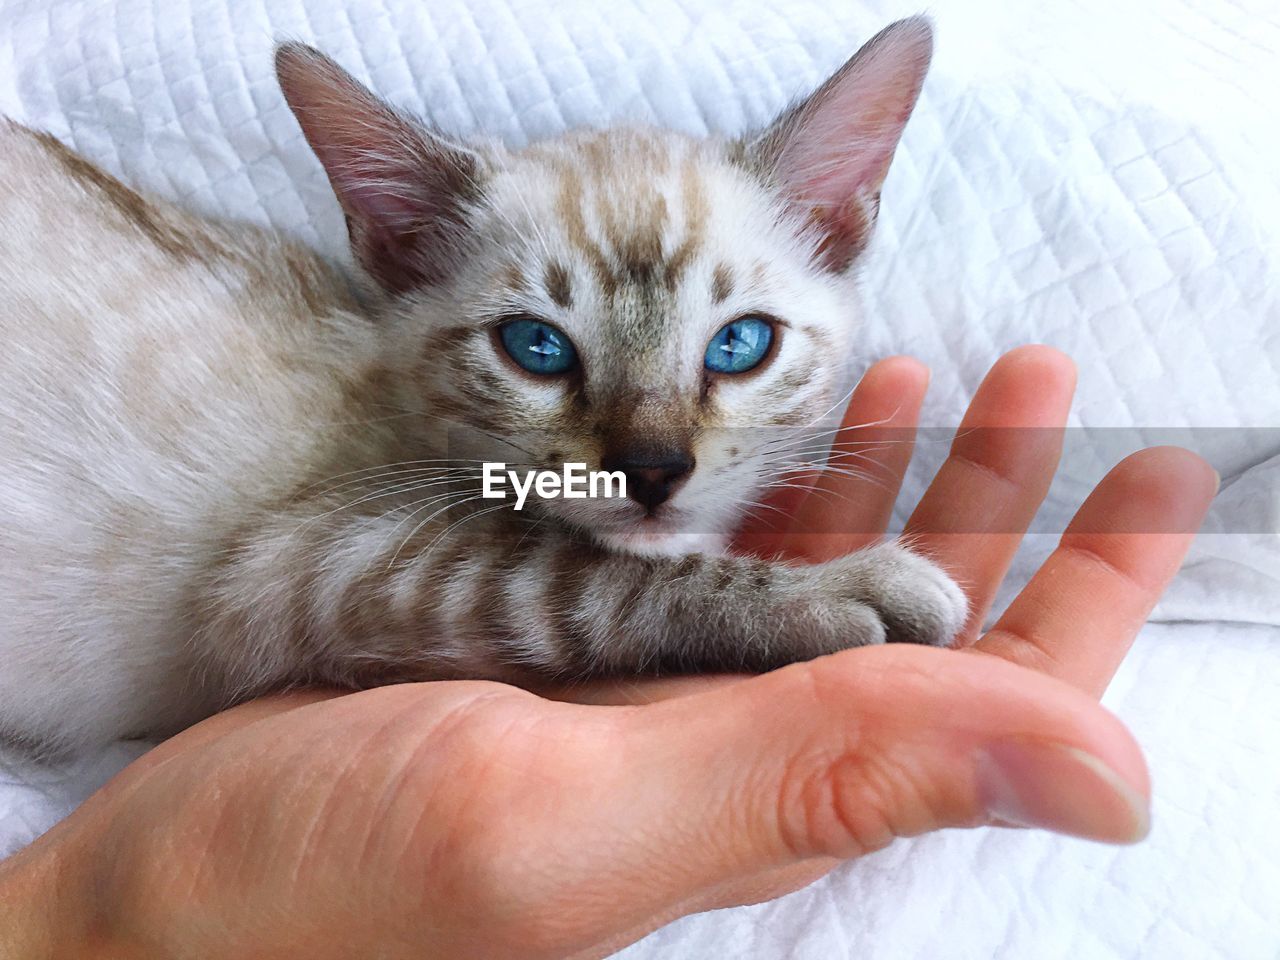 CLOSE-UP OF HAND HOLDING KITTEN WITH EYES